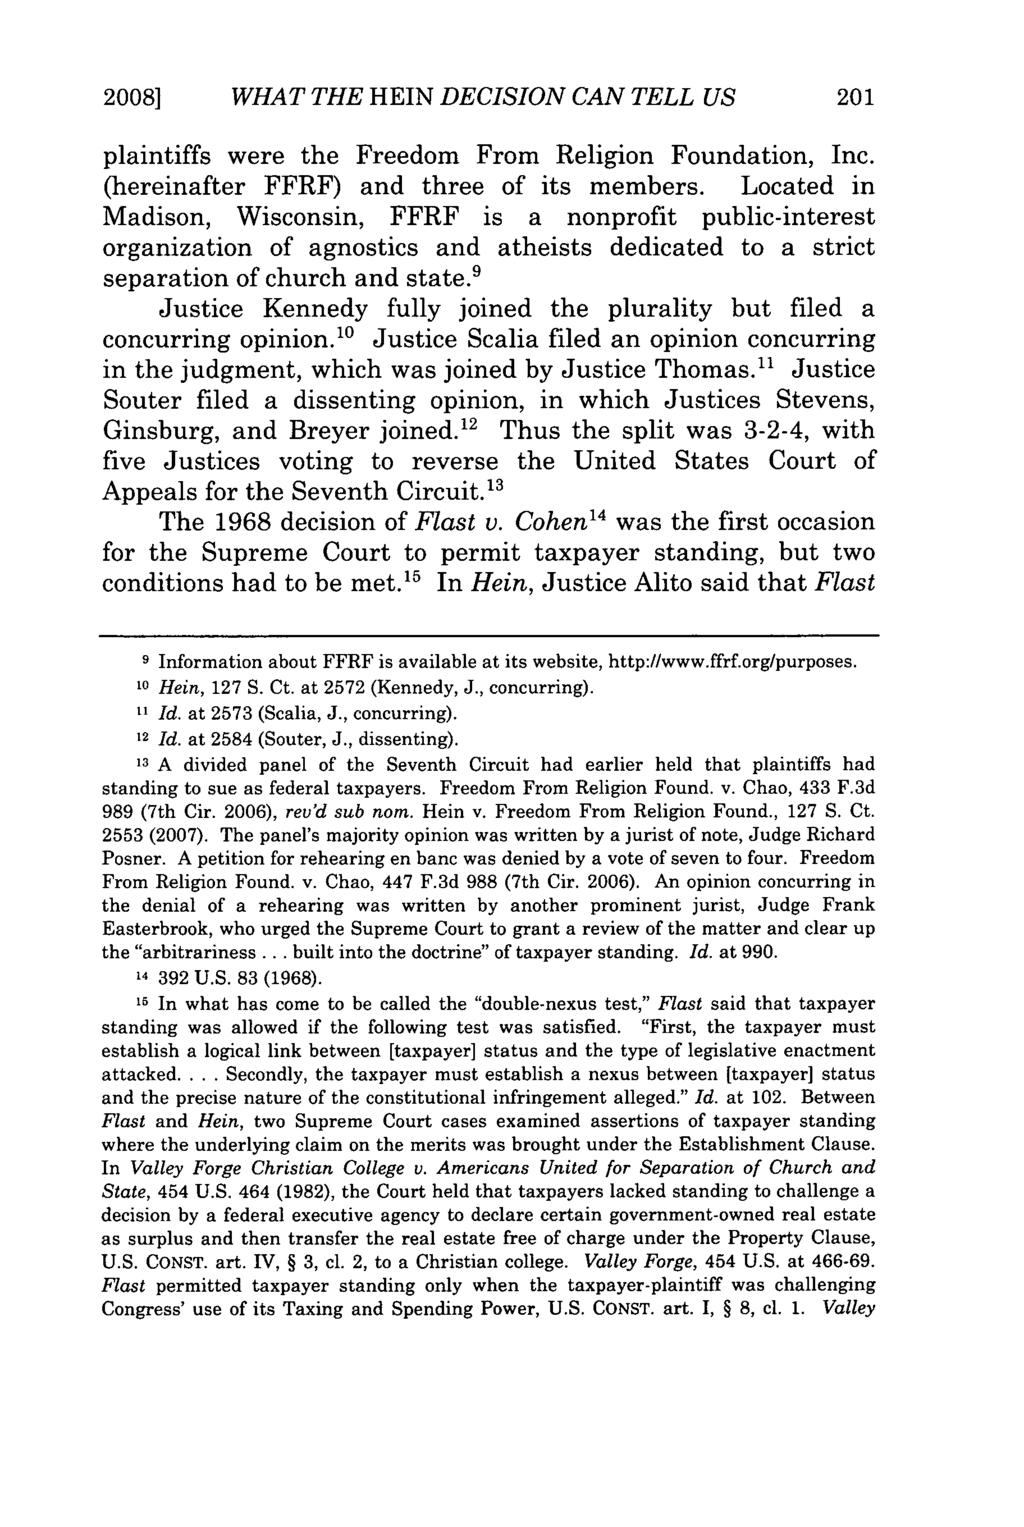 2008] WHAT THE HEIN DECISION CAN TELL US plaintiffs were the Freedom From Religion Foundation, Inc. (hereinafter FFRF) and three of its members.